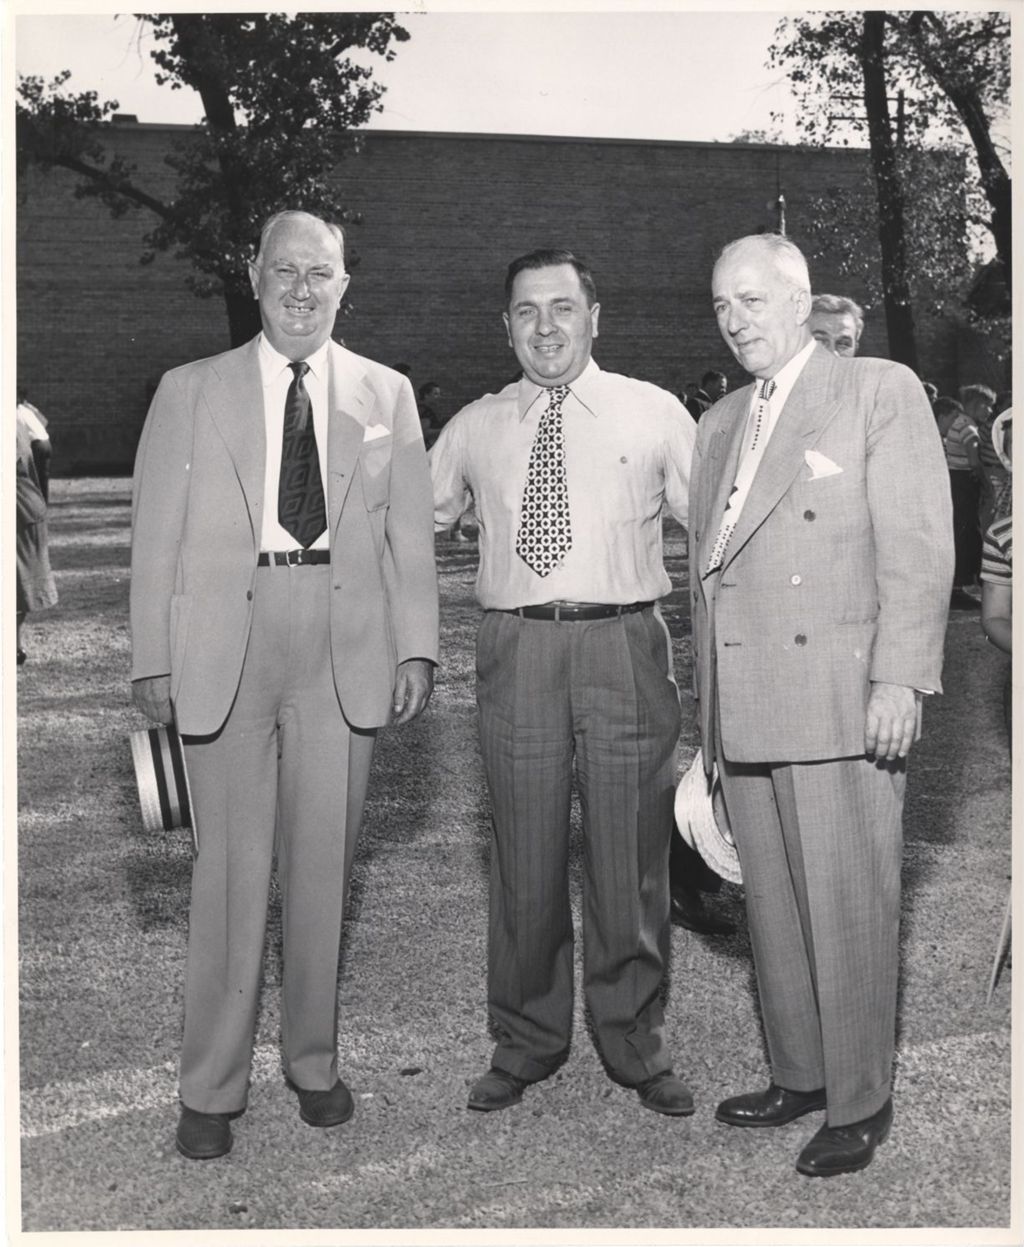 Miniature of Richard J. Daley with two men